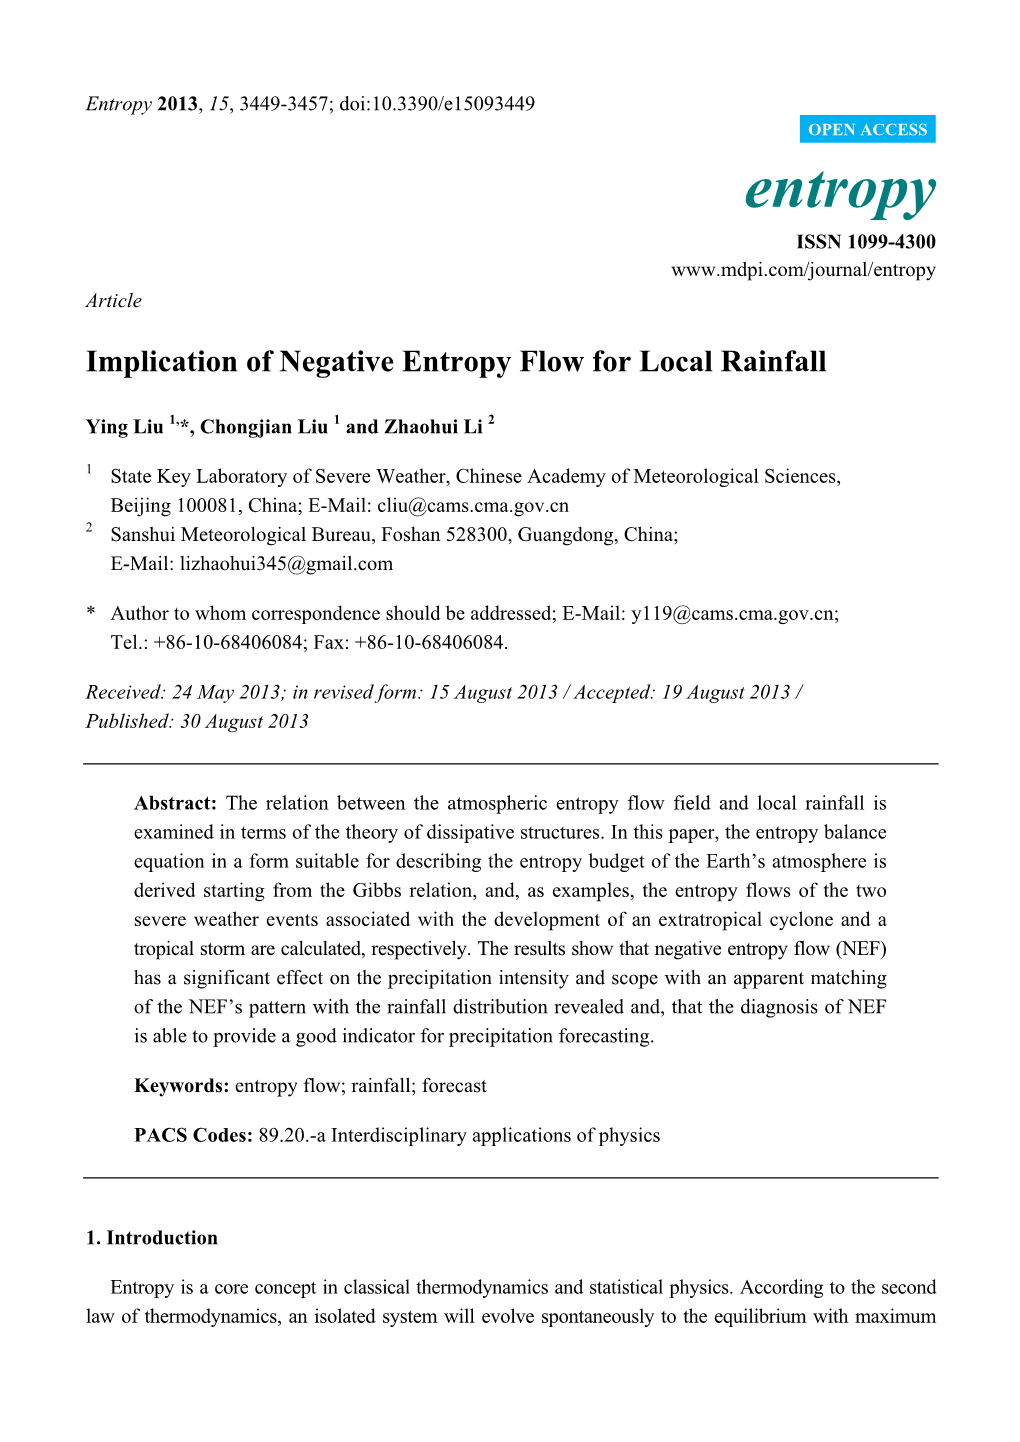 Implication of Negative Entropy Flow for Local Rainfall